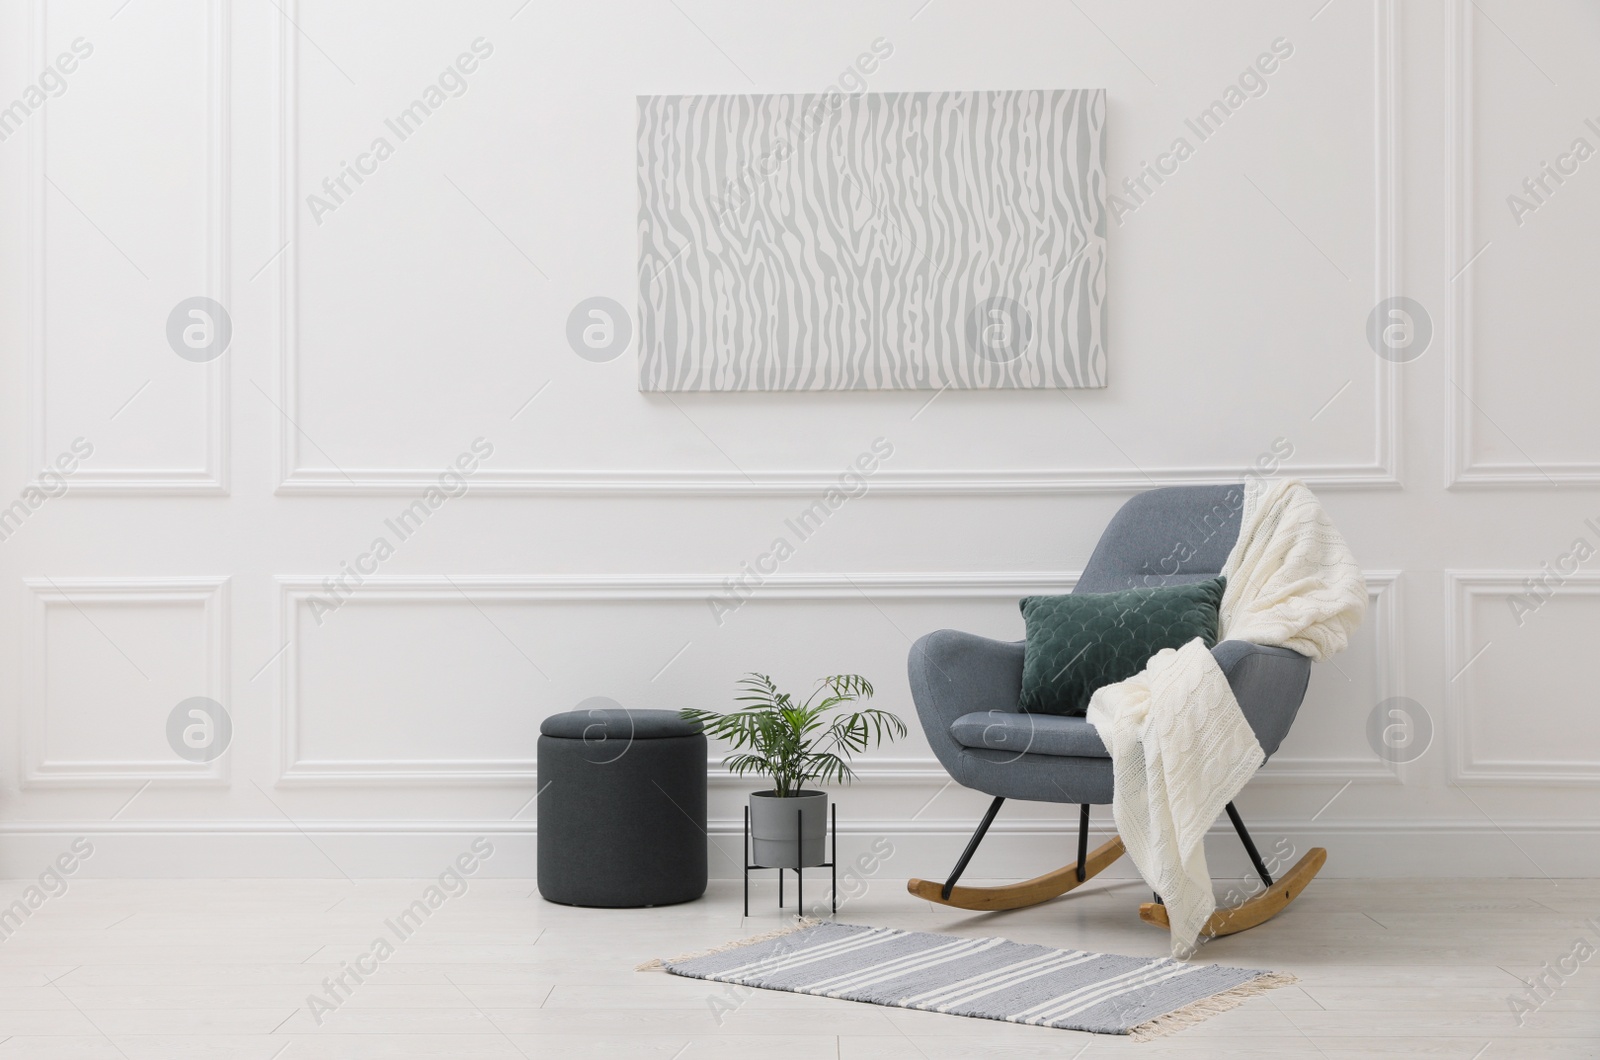 Photo of Stylish room interior with rug, plant and comfortable rocking chair